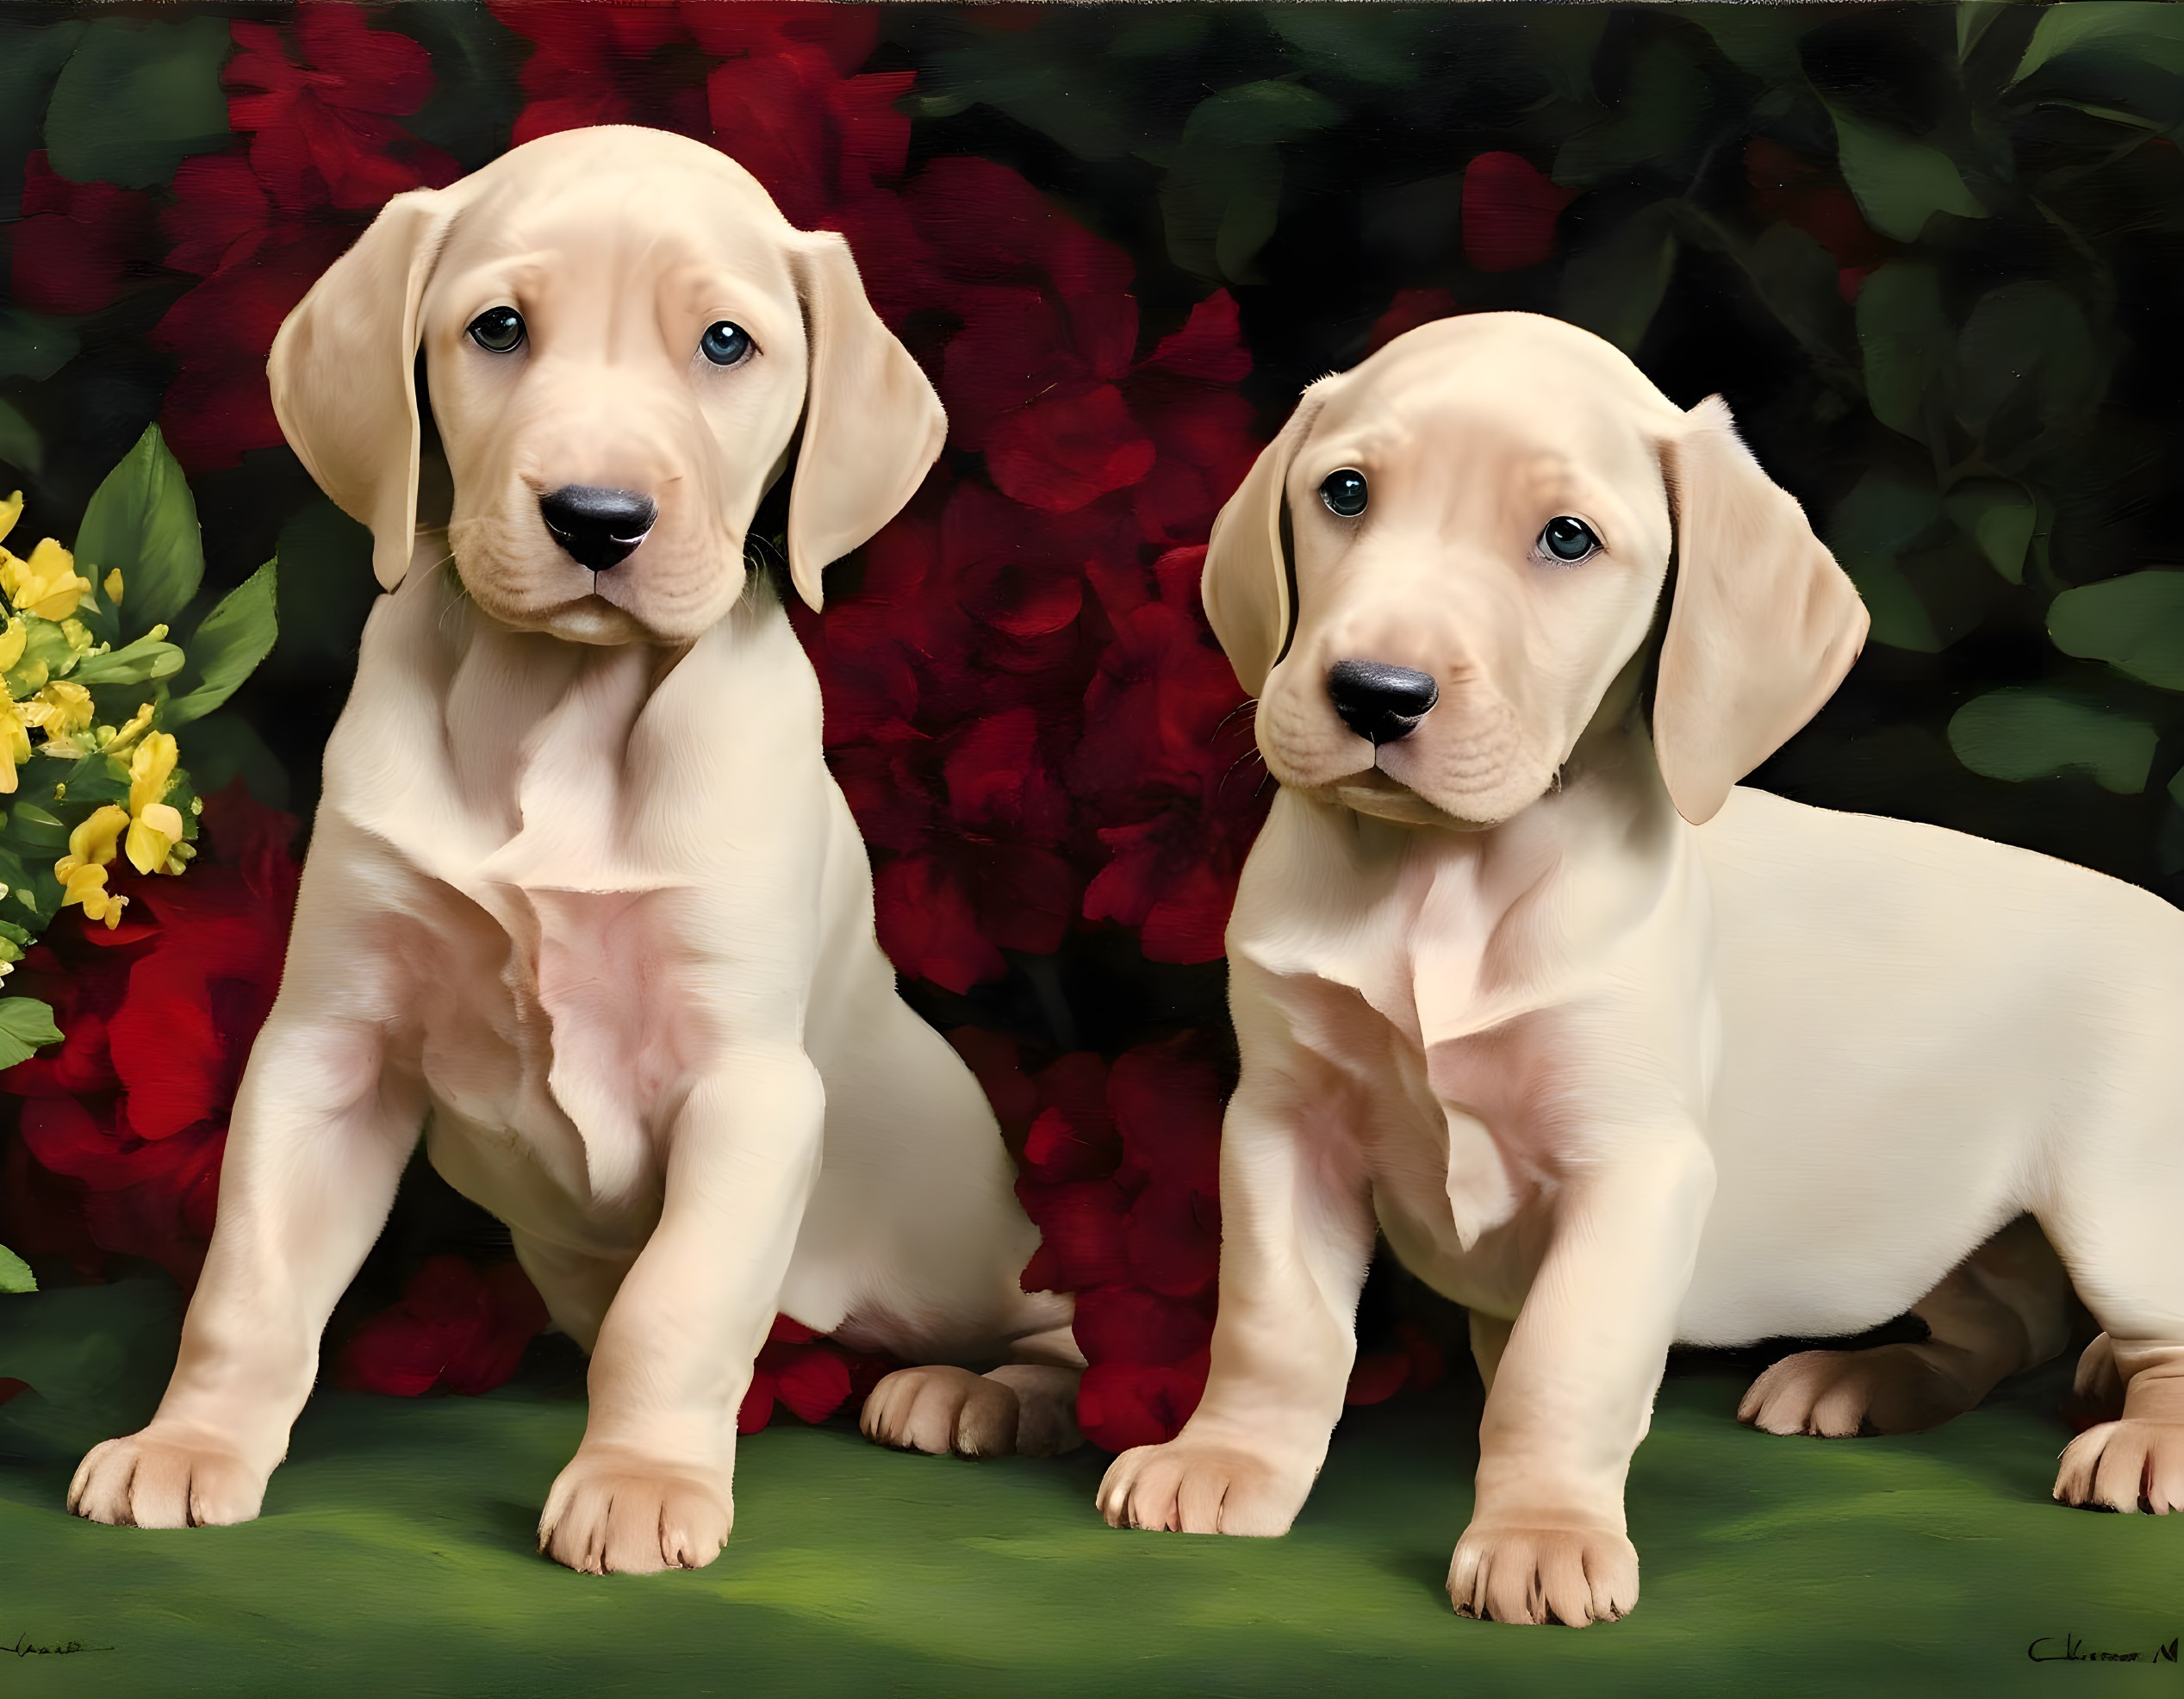 Labrador puppies in lush greenery with red flowers